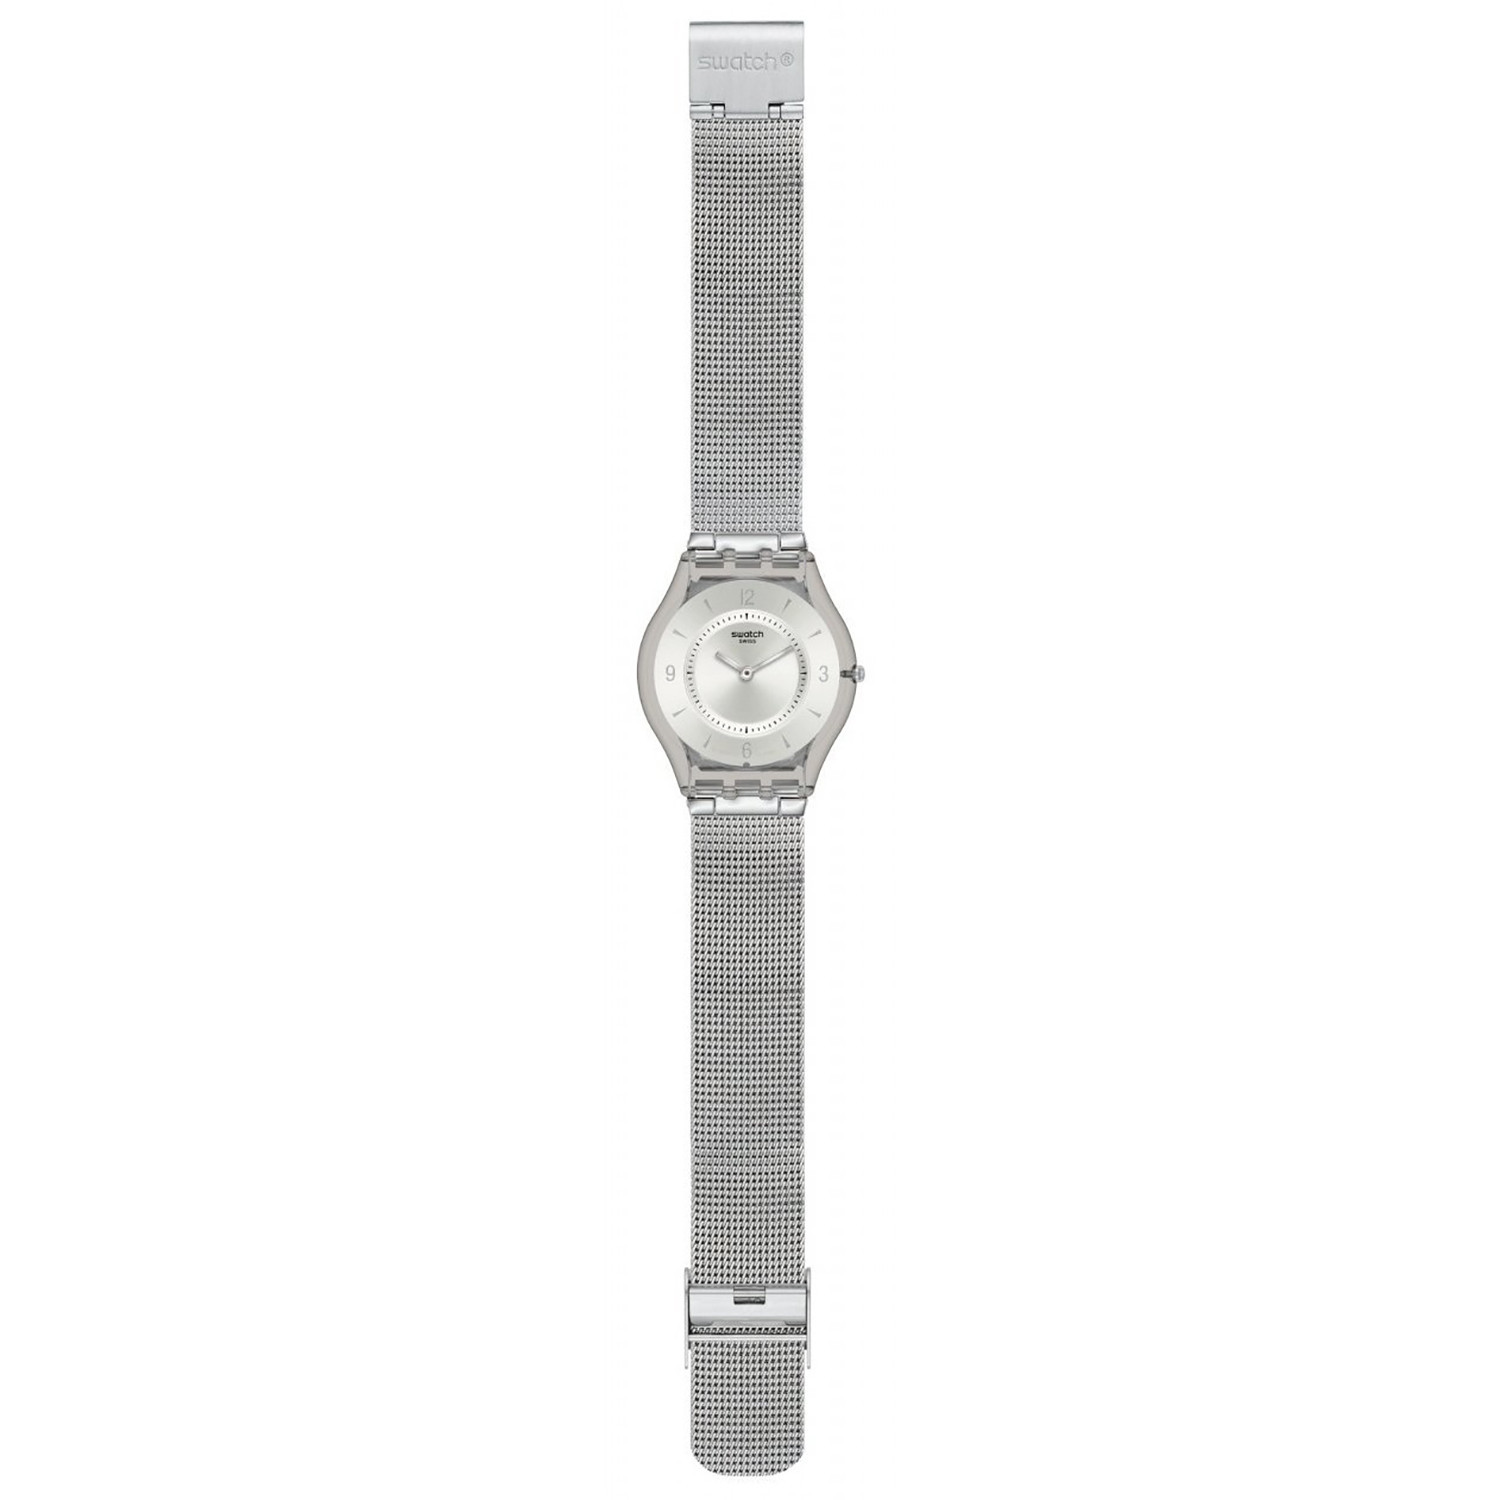 Montre femme Swatch Skin Classic Metal Knit
Collection Lifestyle